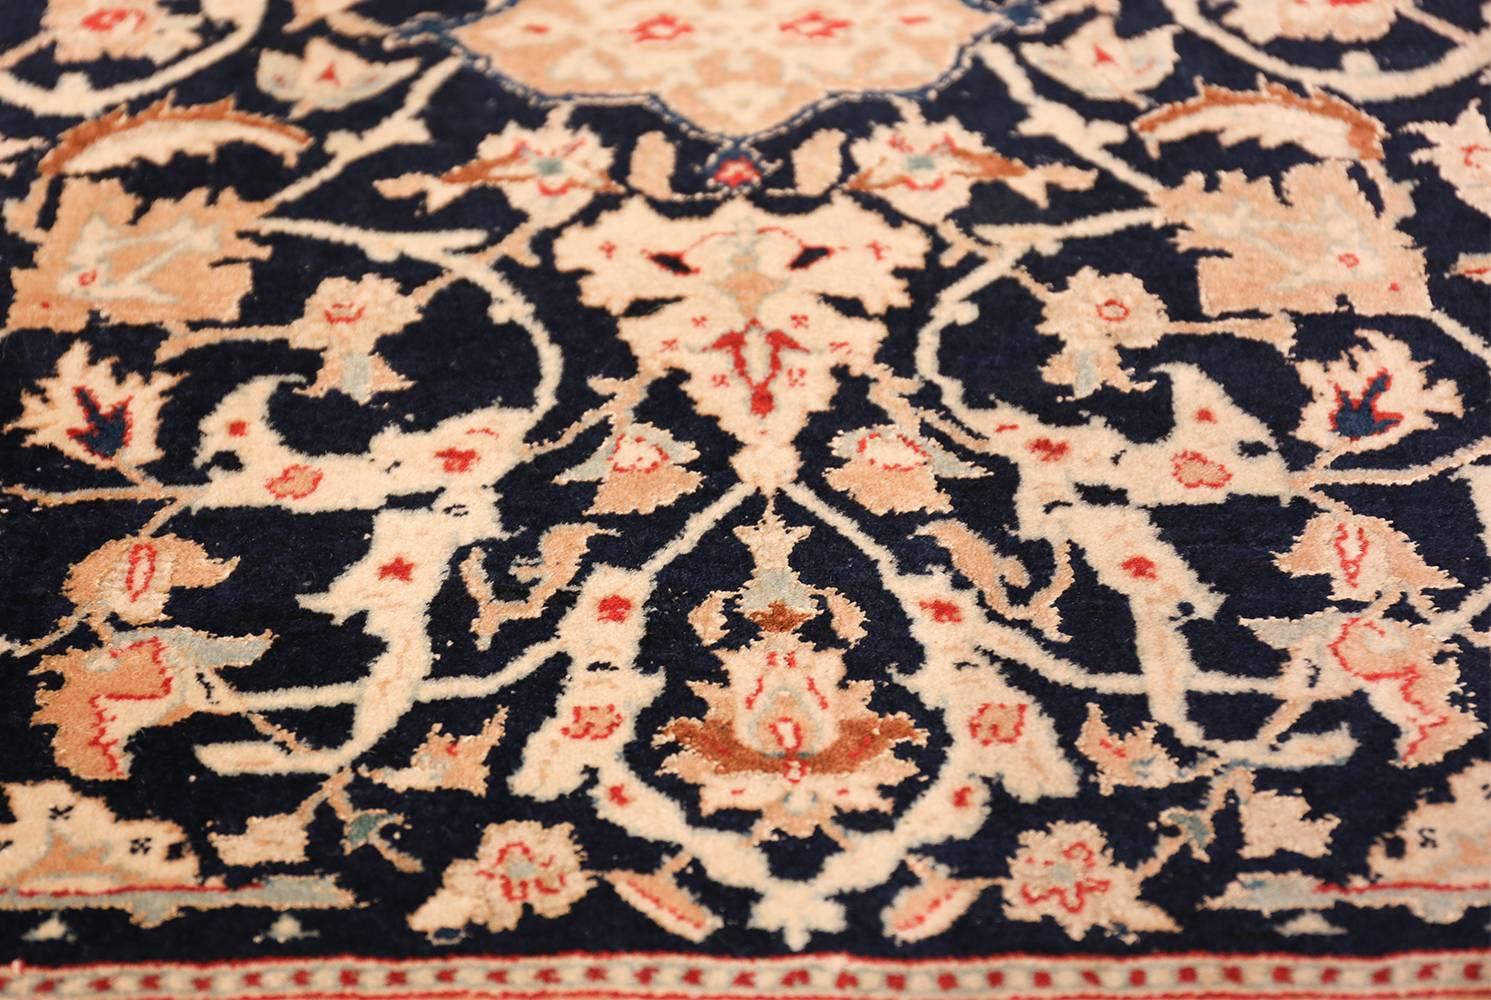 Beautiful Silk and Wool Vintage Nain Persian Rug, Country of Origin / Rug Type: Vintage Persian Rug, Circa Date: Mid – 20th Century
ranian Persian Nain Rugs – Nain is a small village located in central Iran that has relatively recently become a